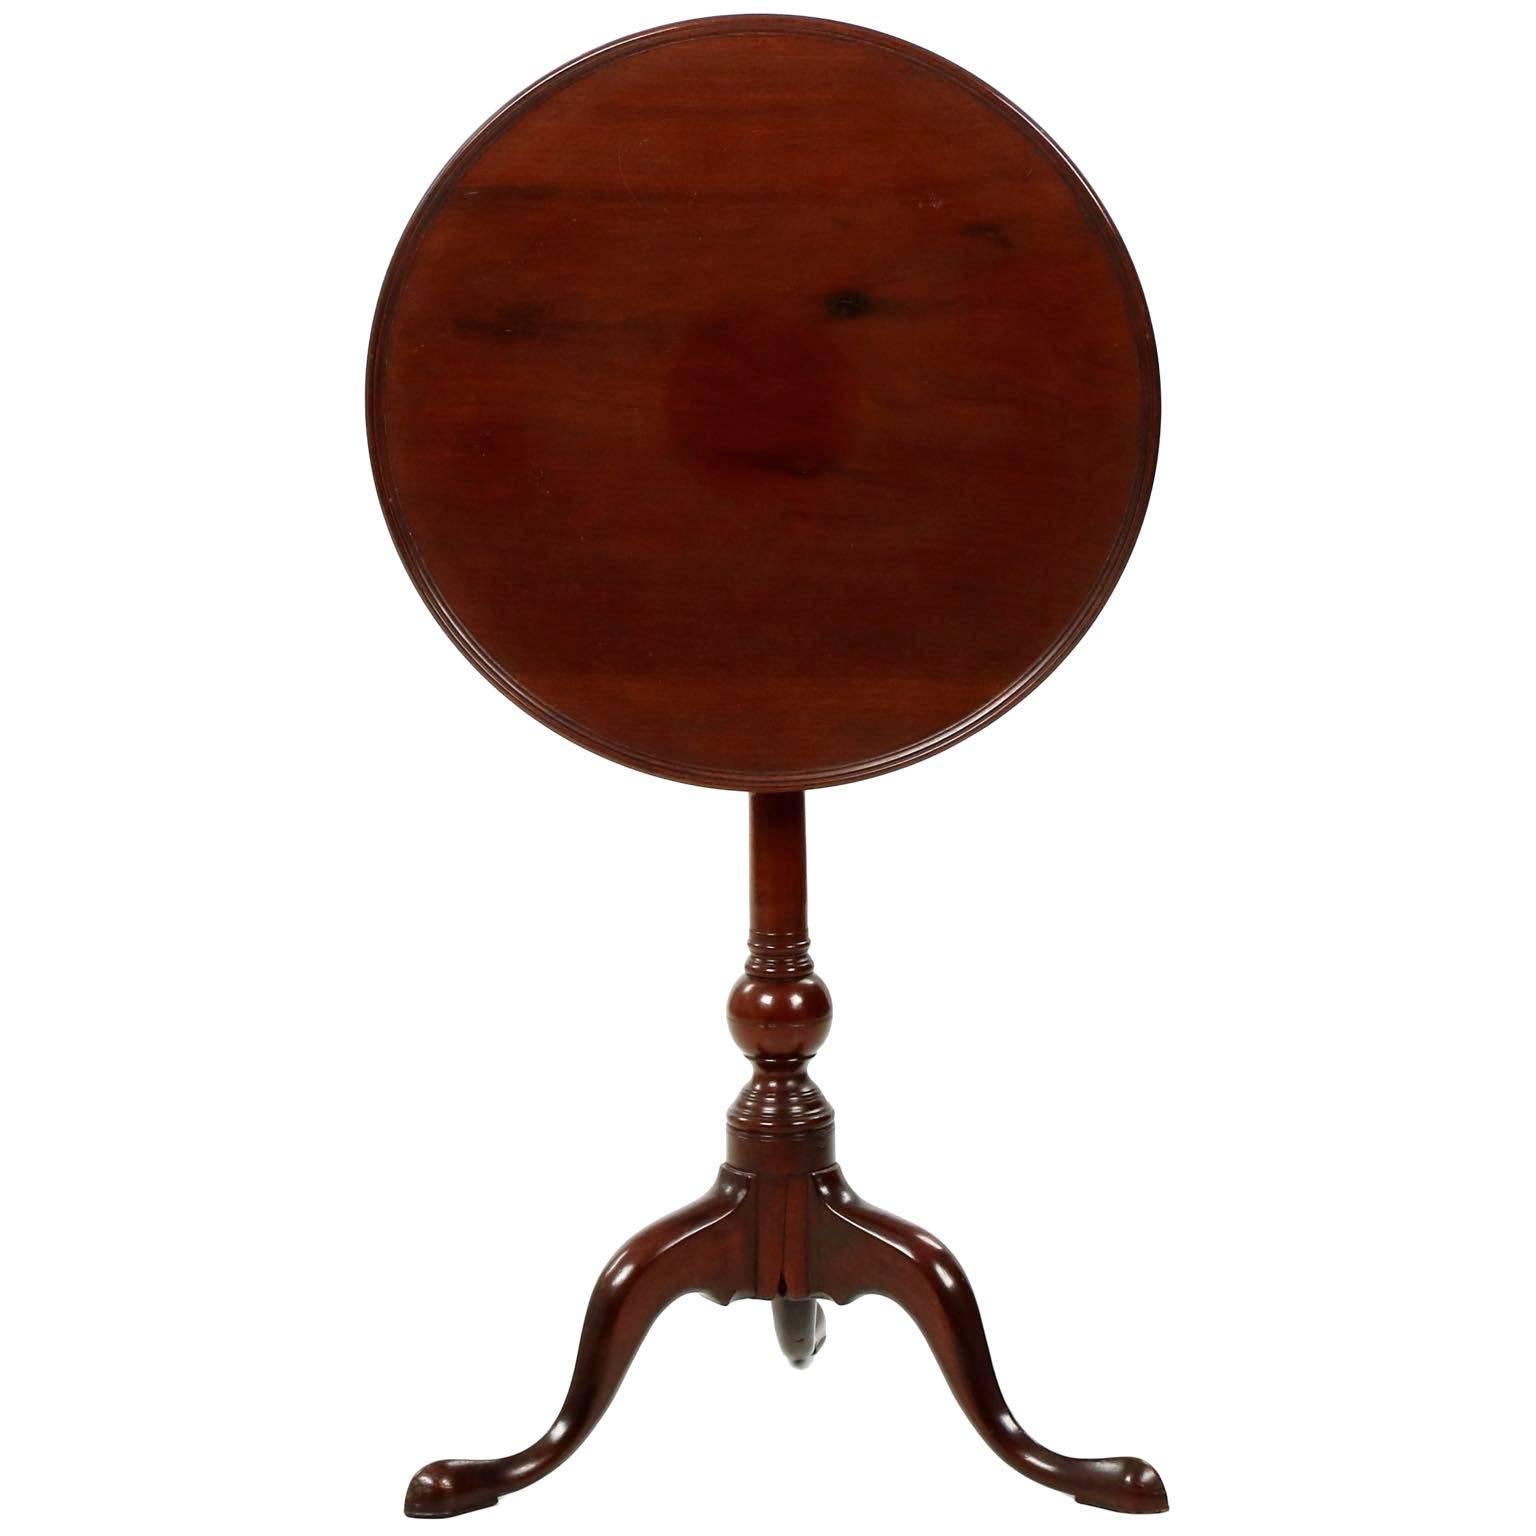 A most attractive American Queen Anne mahogany candle stand from the Philadelphia area, circa the last quarter of the 18th century, the table is particularly striking for the diminutive and fully developed suppressed ball at the bottom of the long